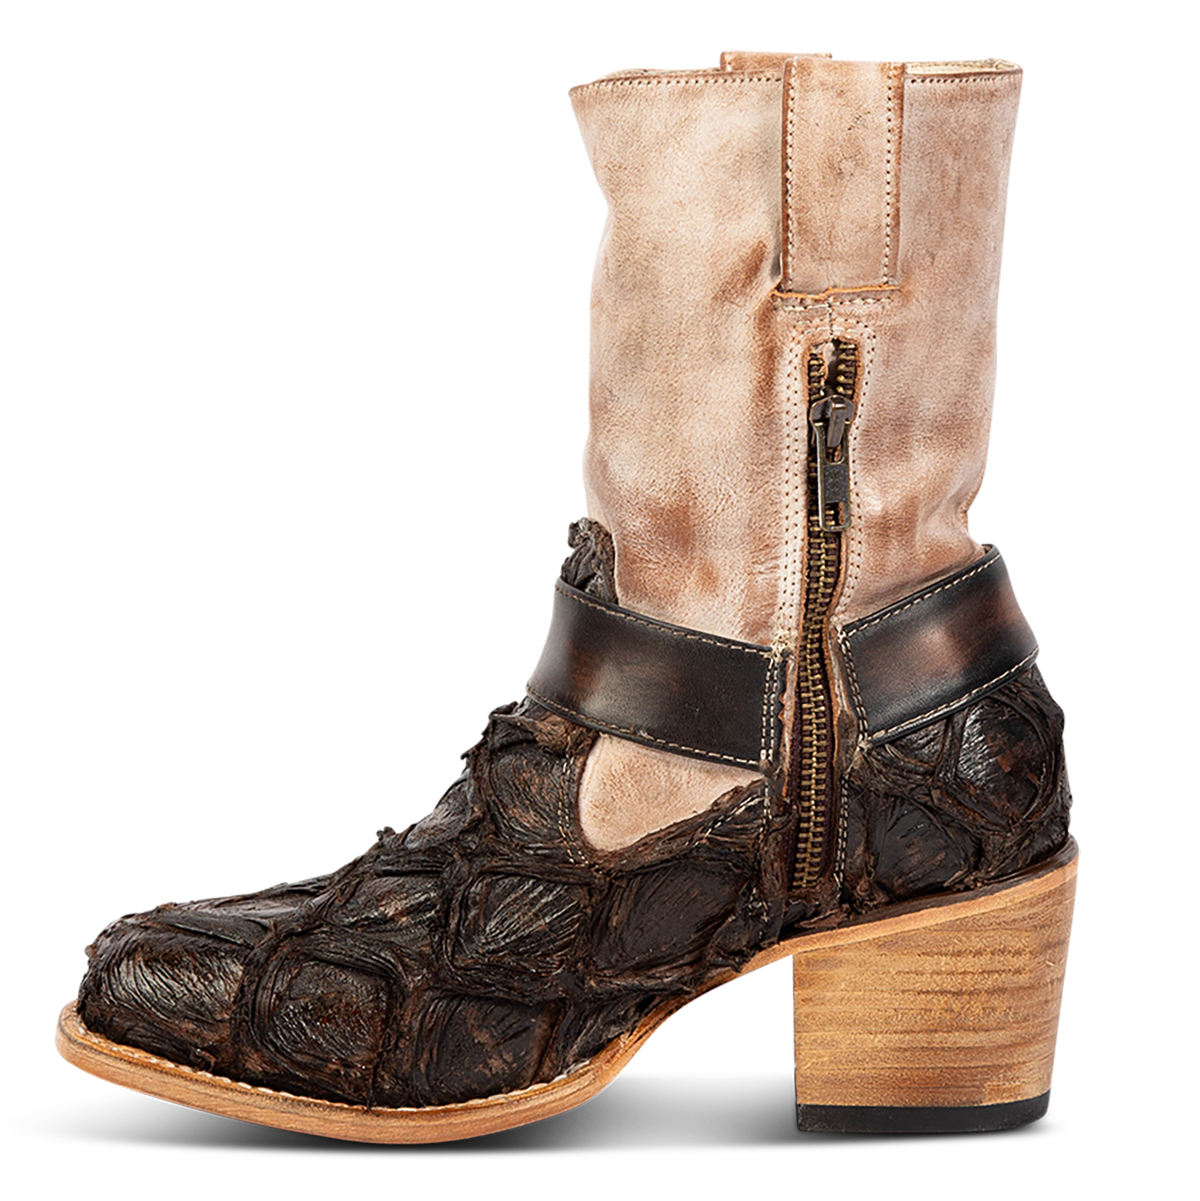 Inside view showing FREEBIRD women's Darcy taupe multi fish leather boot with a studded ankle harness, leather pull straps, an inside zip closure and a square toe